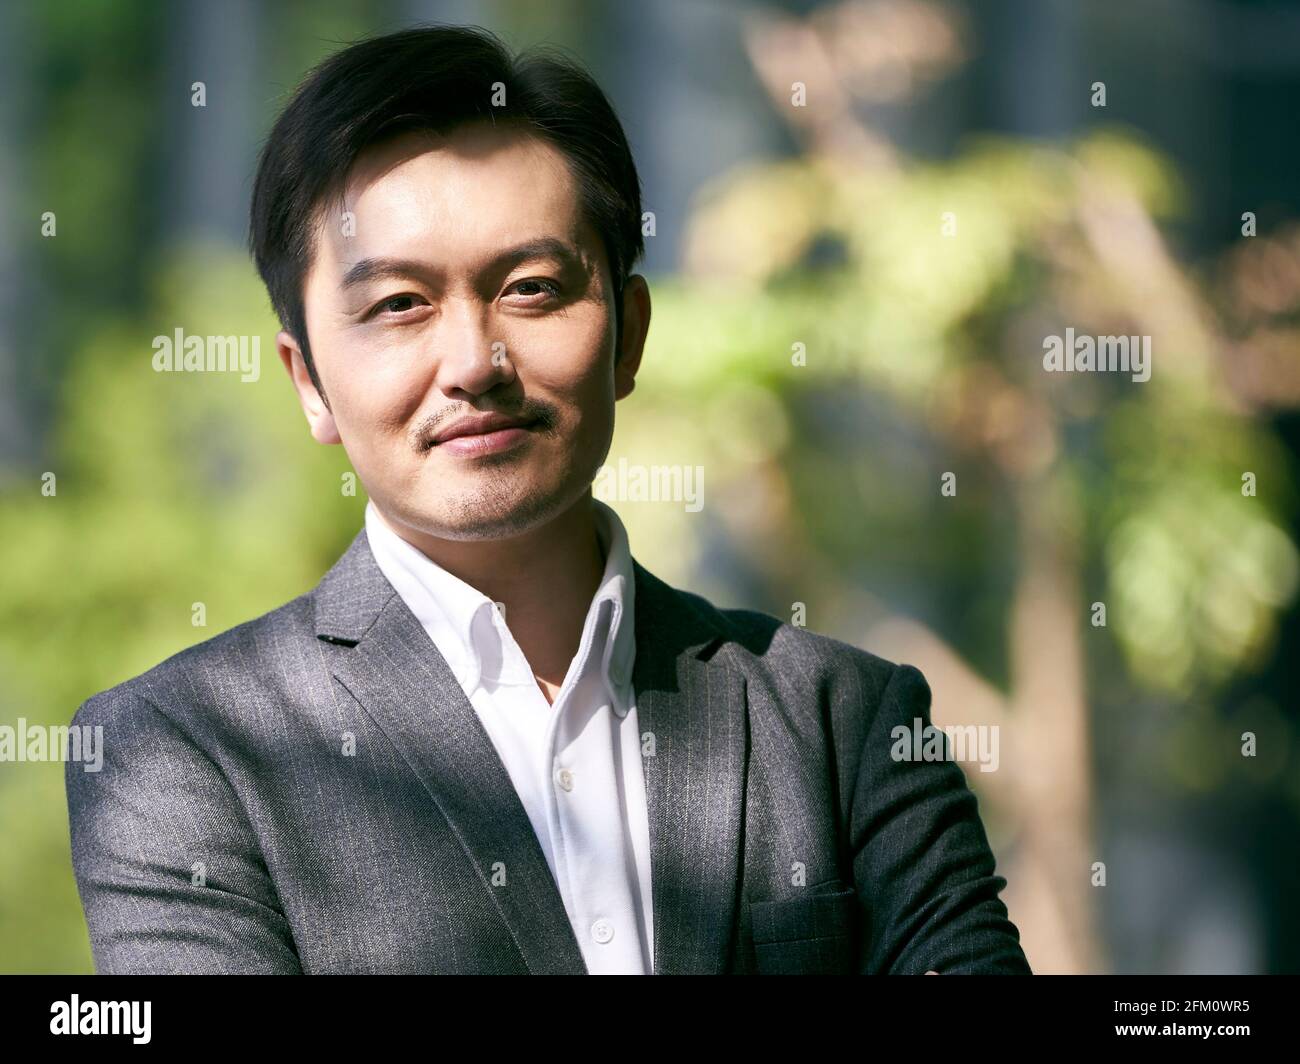 outdoor portrait of successful asian businessman looking at camera smiling Stock Photo